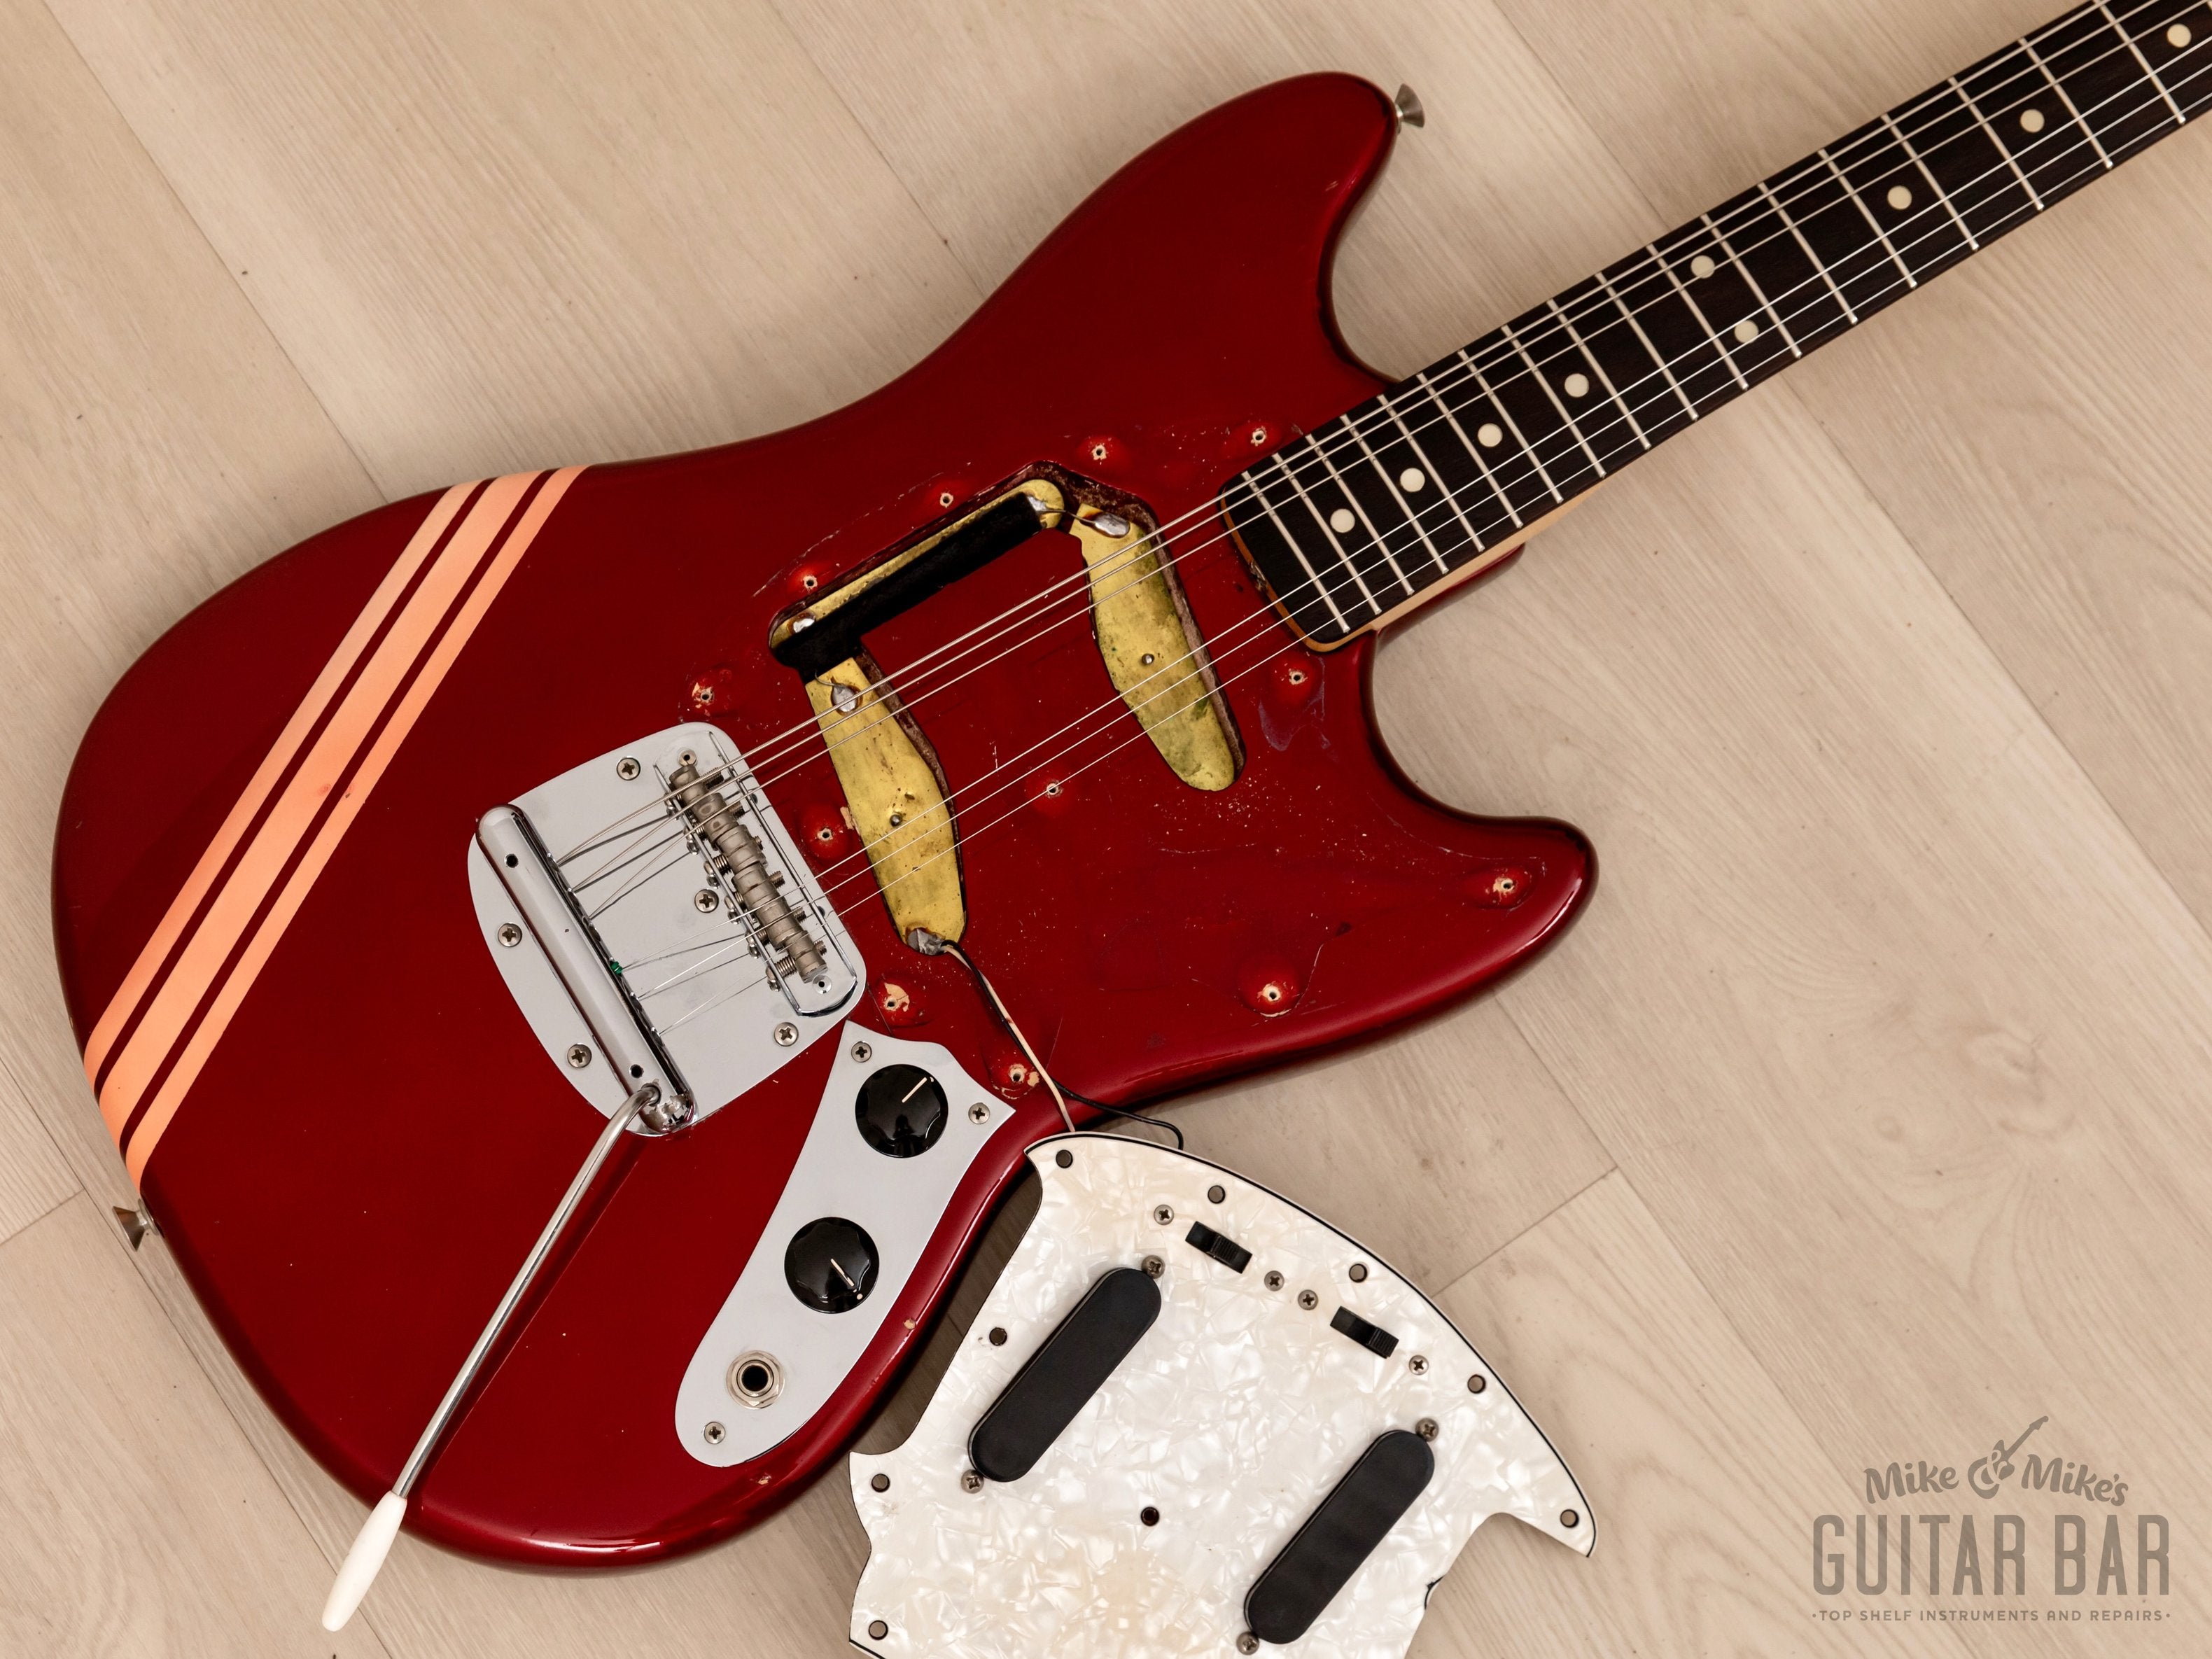 1972 Fender Mustang Vintage Offset Electric Guitar Competition Red Collector-Grade w/ Case, Warranty Card